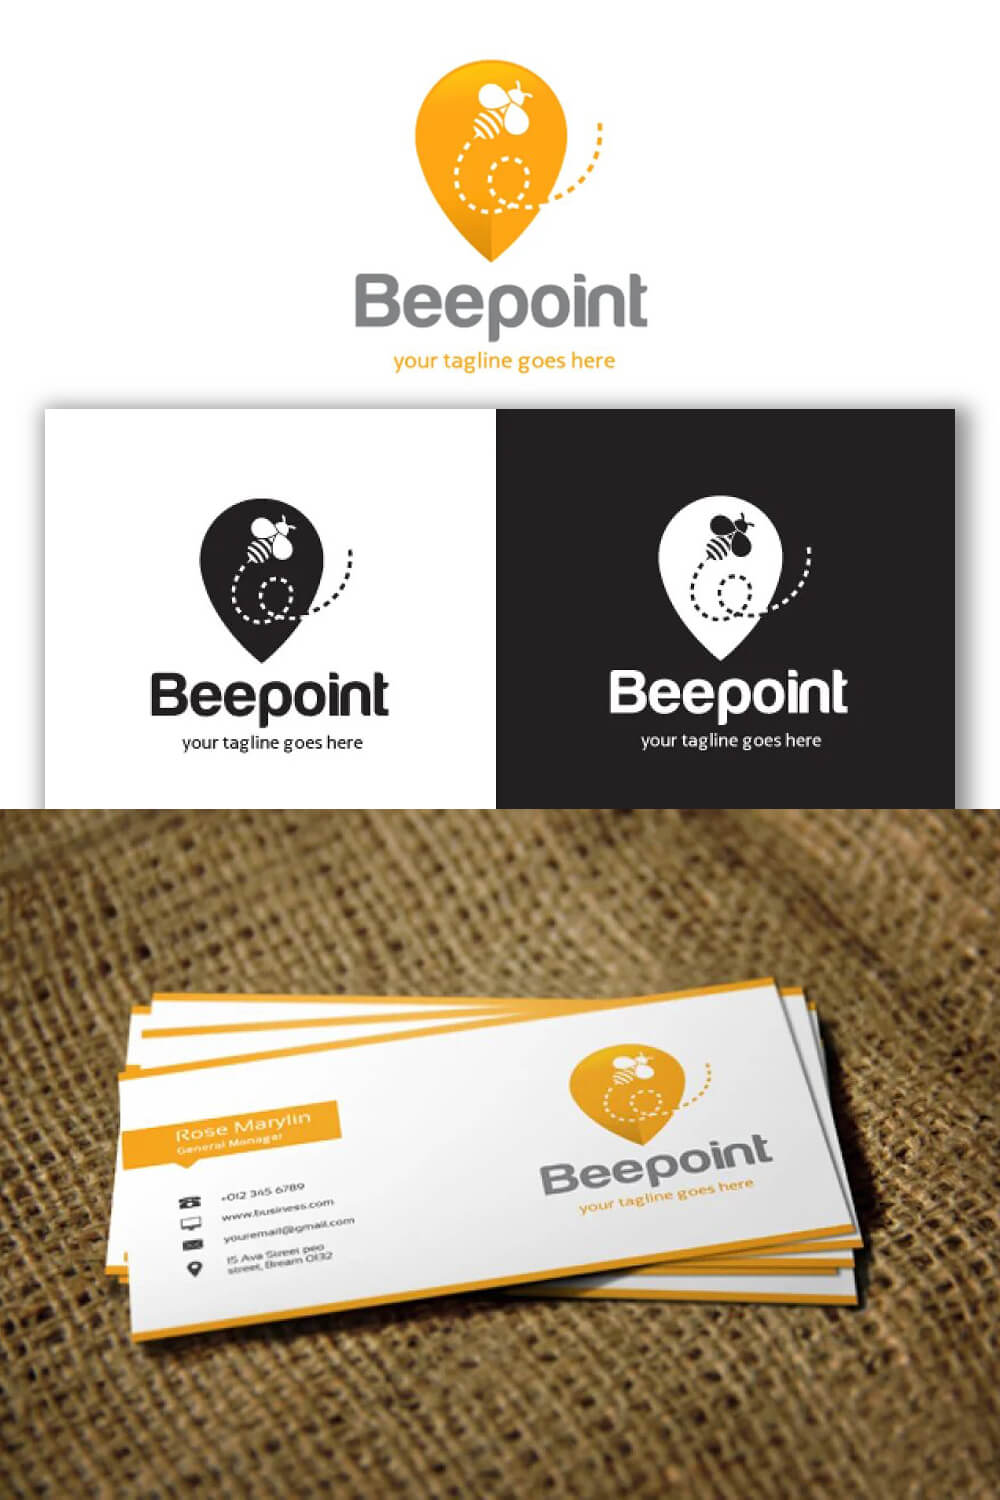 All examples of using logo Beepoint.